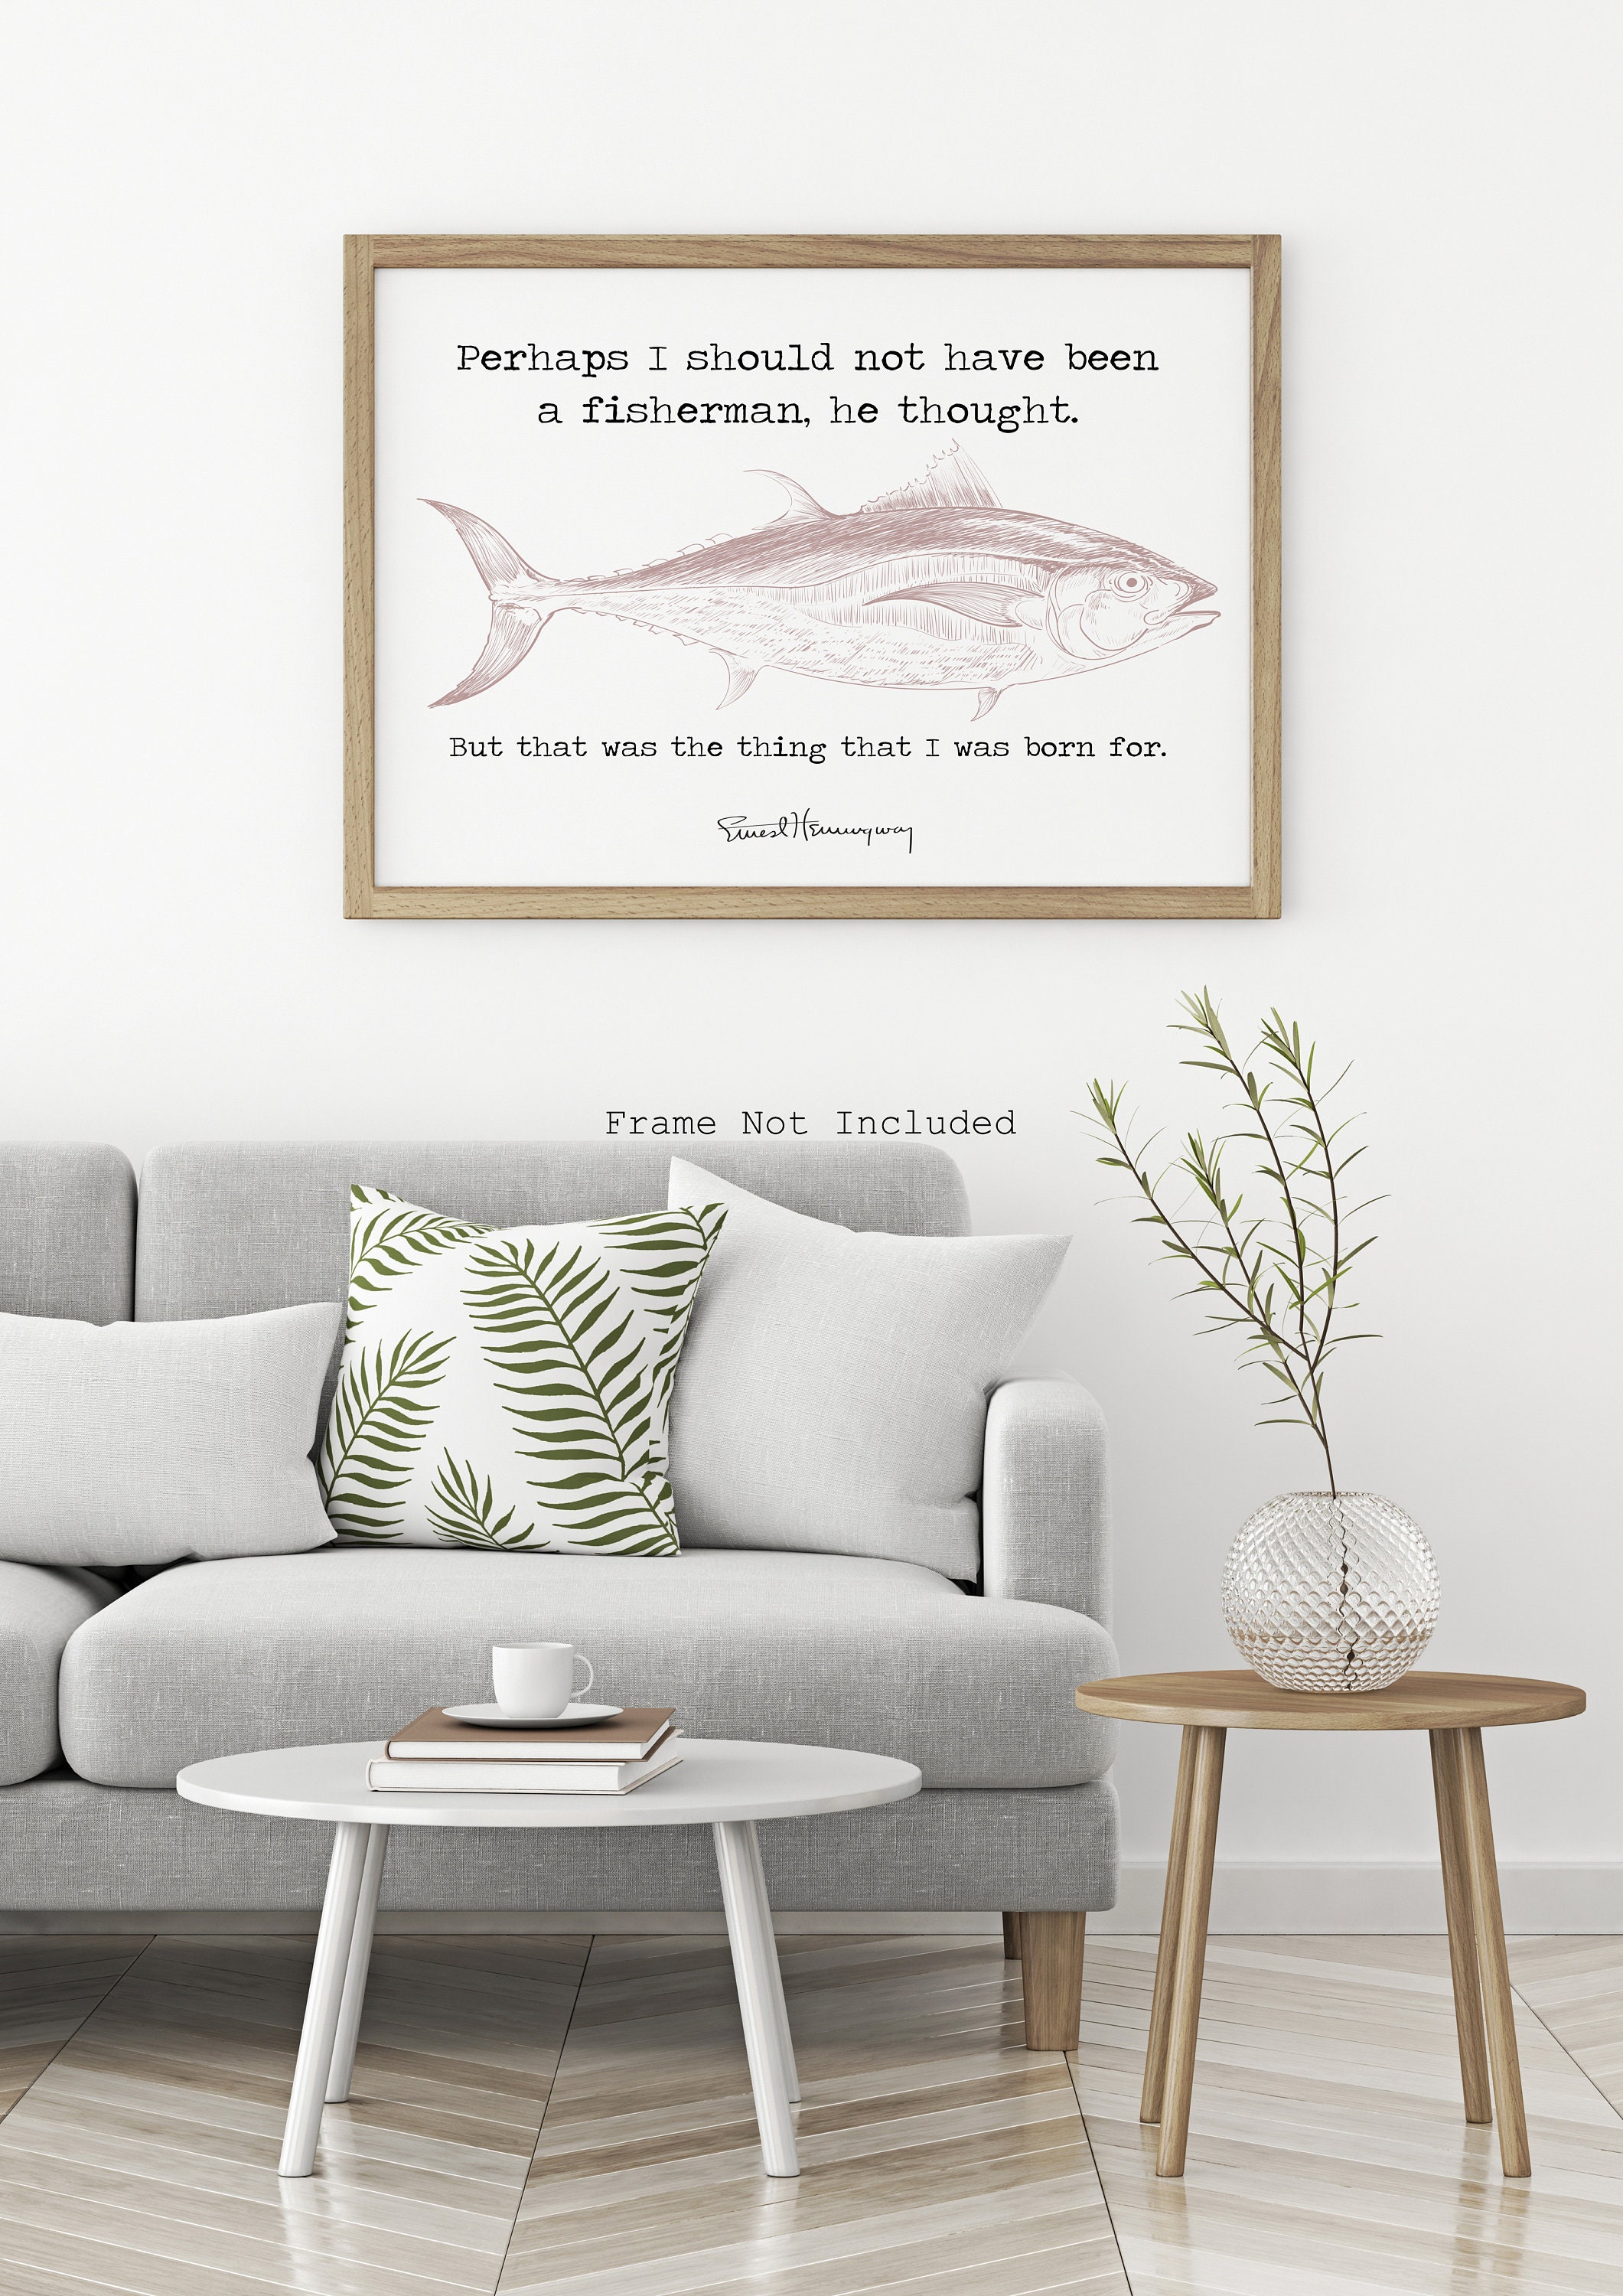 Hemingway Quote Fishing Quote From the Old Man and the Sea | Etsy